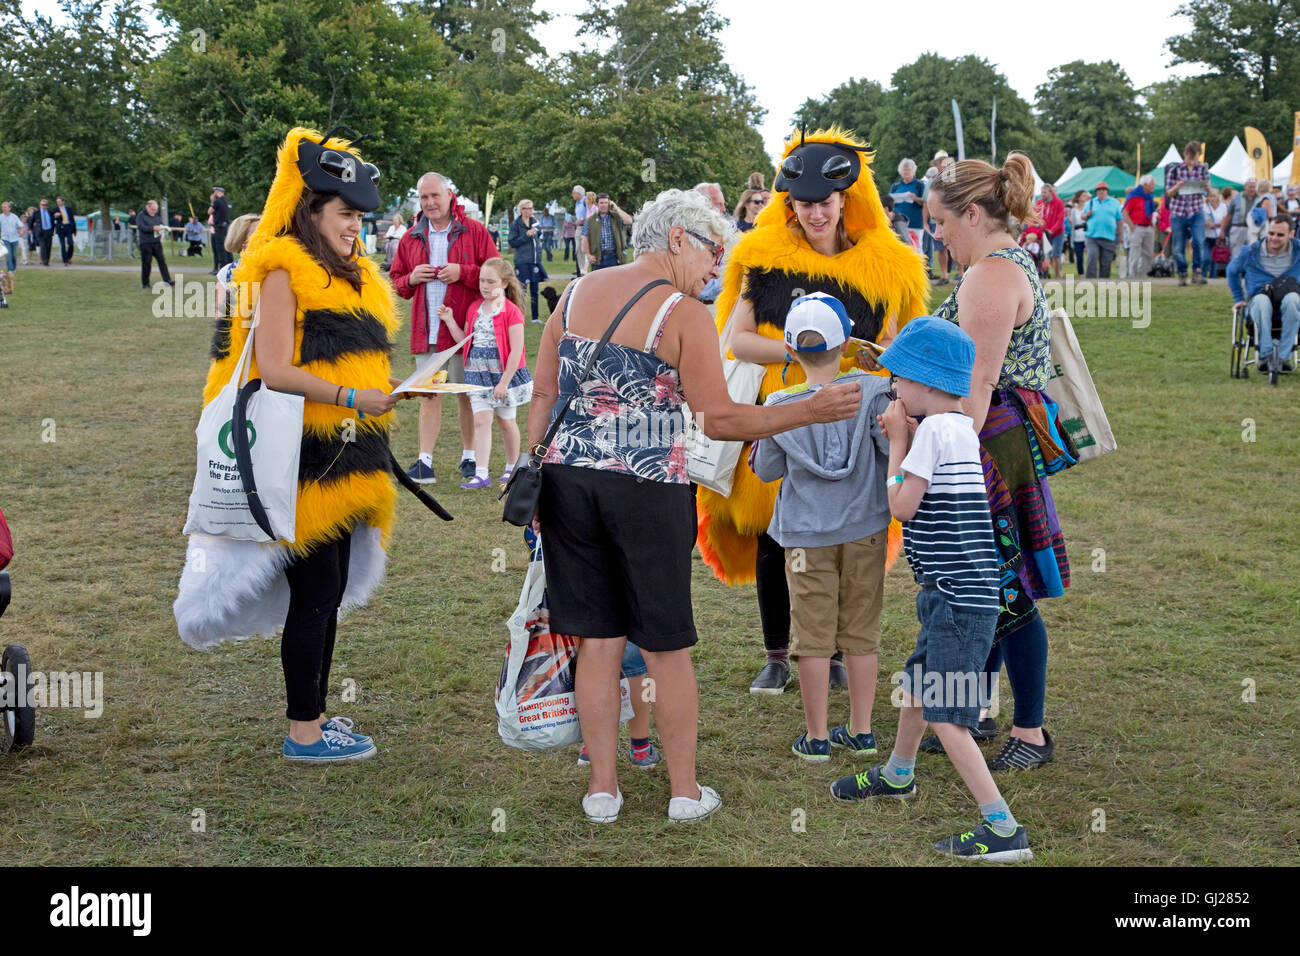 People in bee costumes talking to children about bee conservation Countryfile Live 2016 Blenheim Palace Woodstock Stock Photo